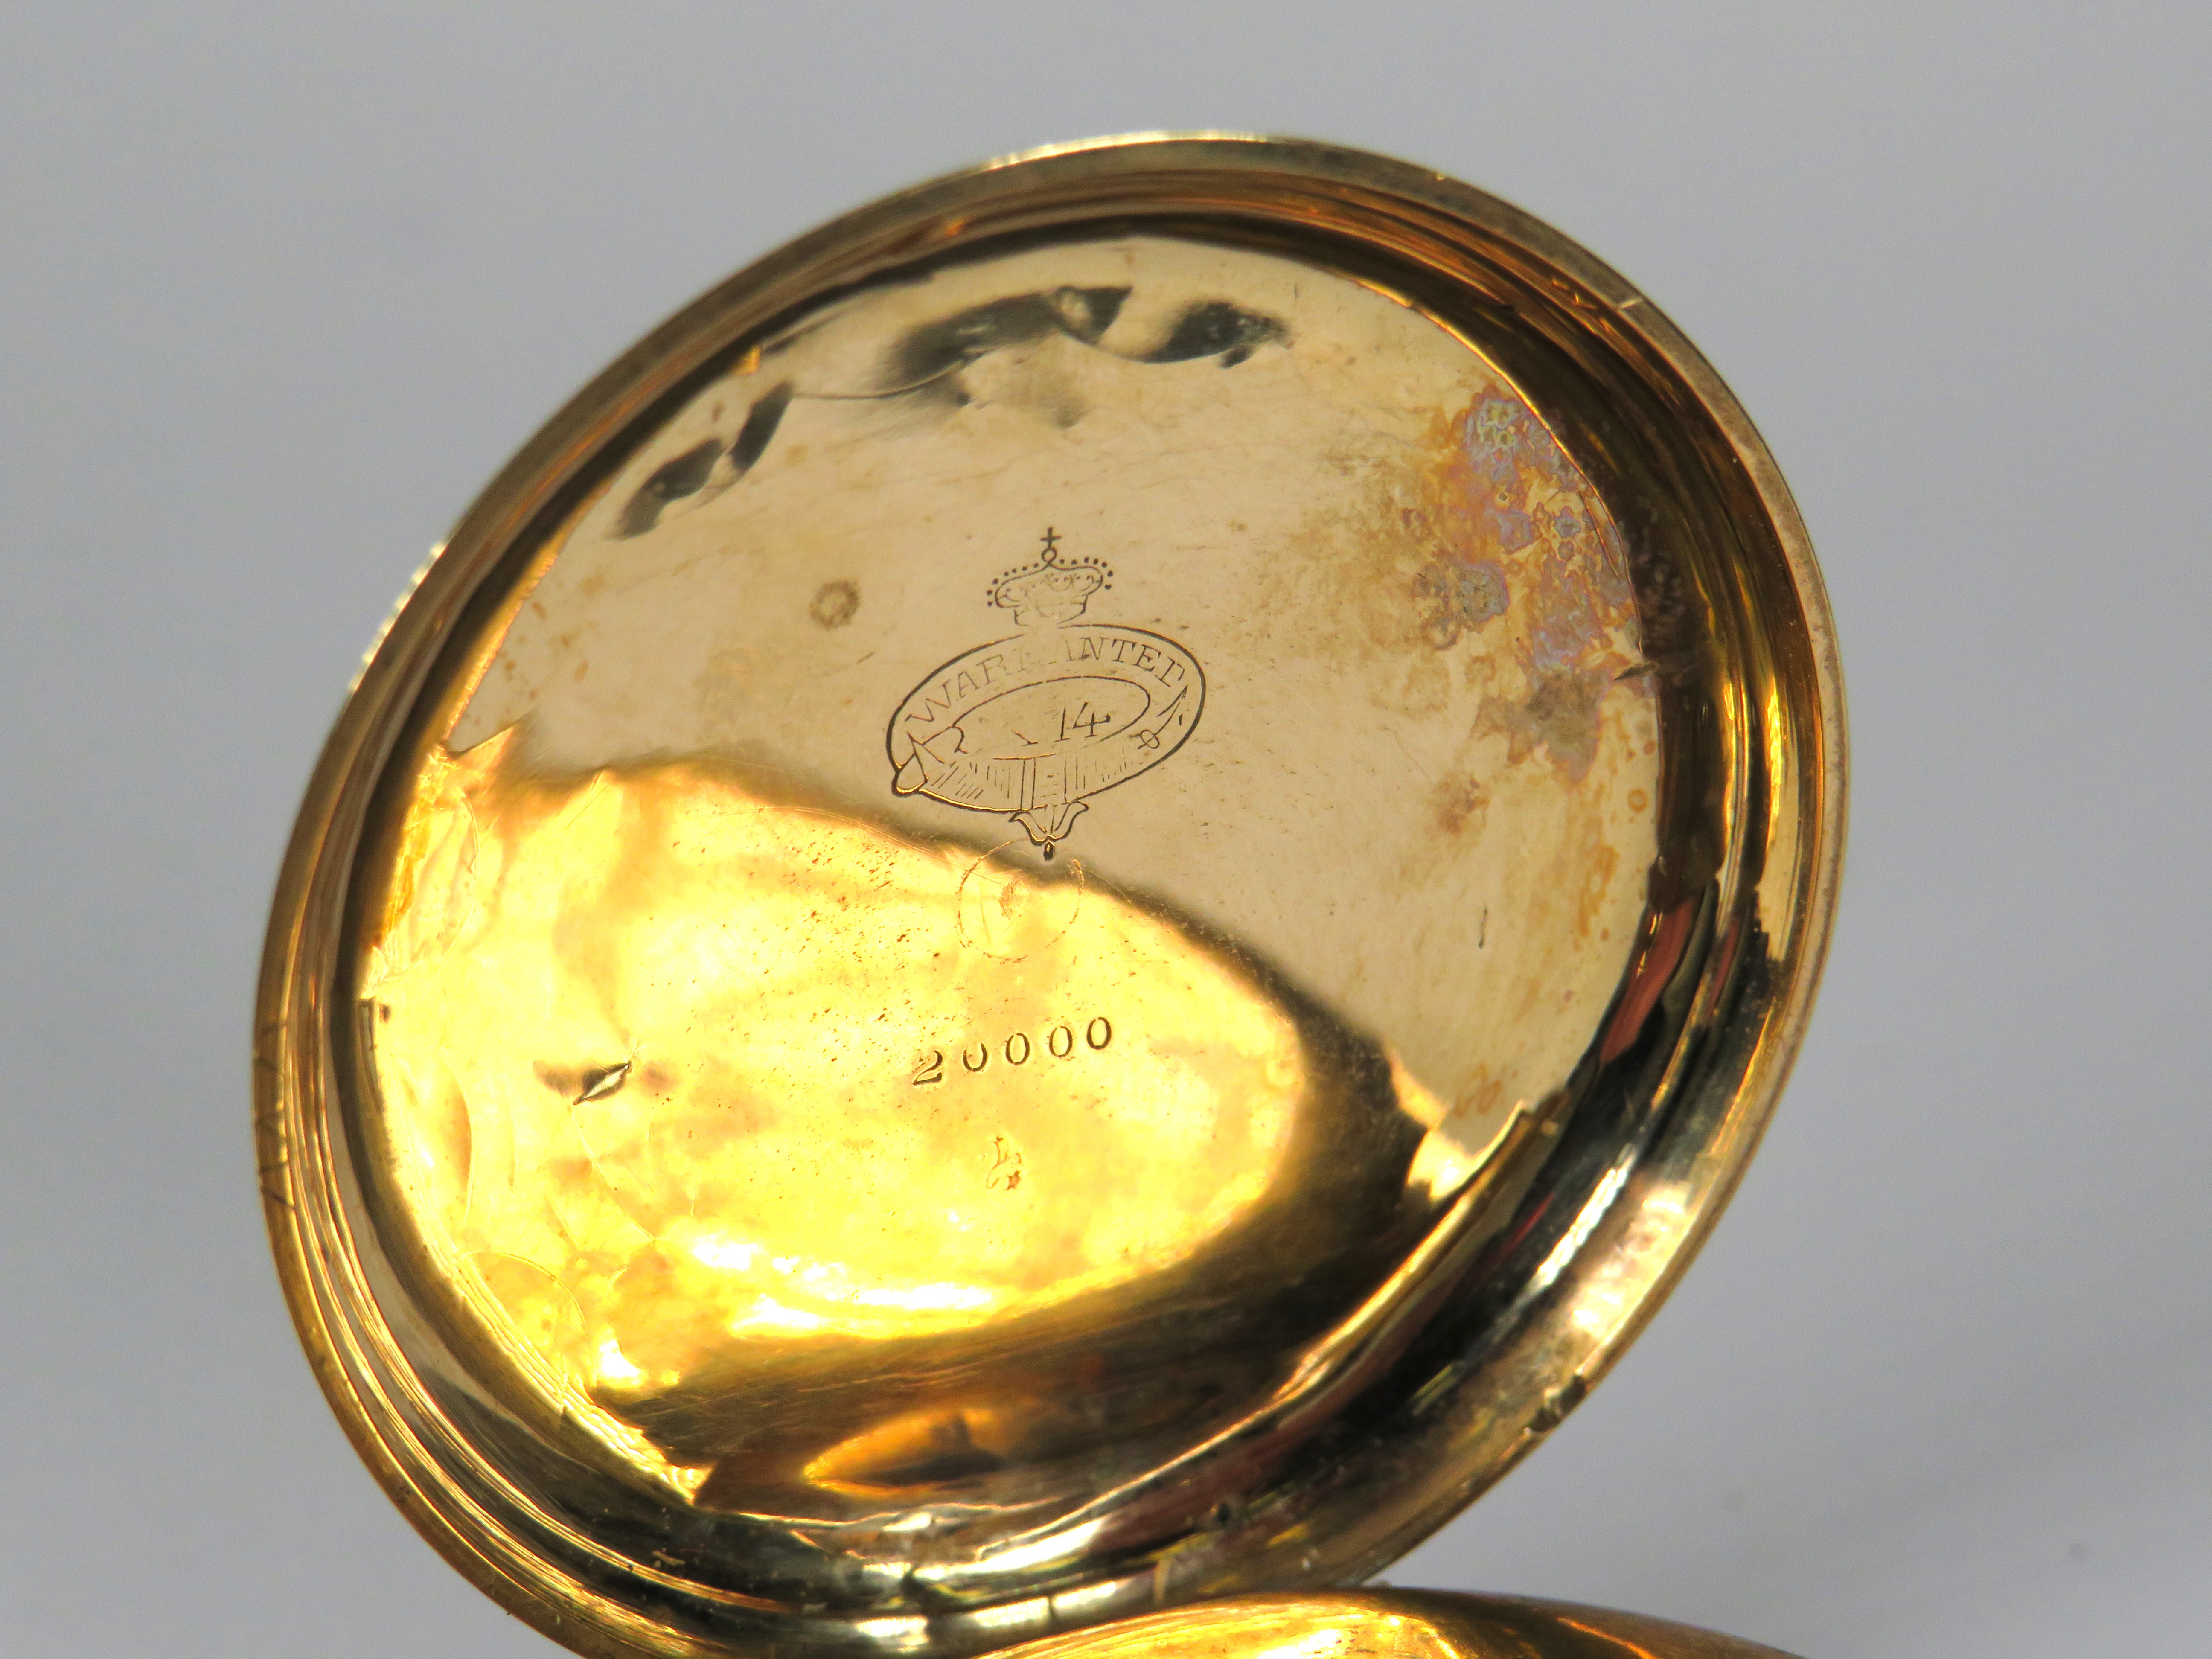 14ct Yellow Gold Bodied Pocket watch with Gold tone back and front. Comes with two keys, intermitten - Image 4 of 6